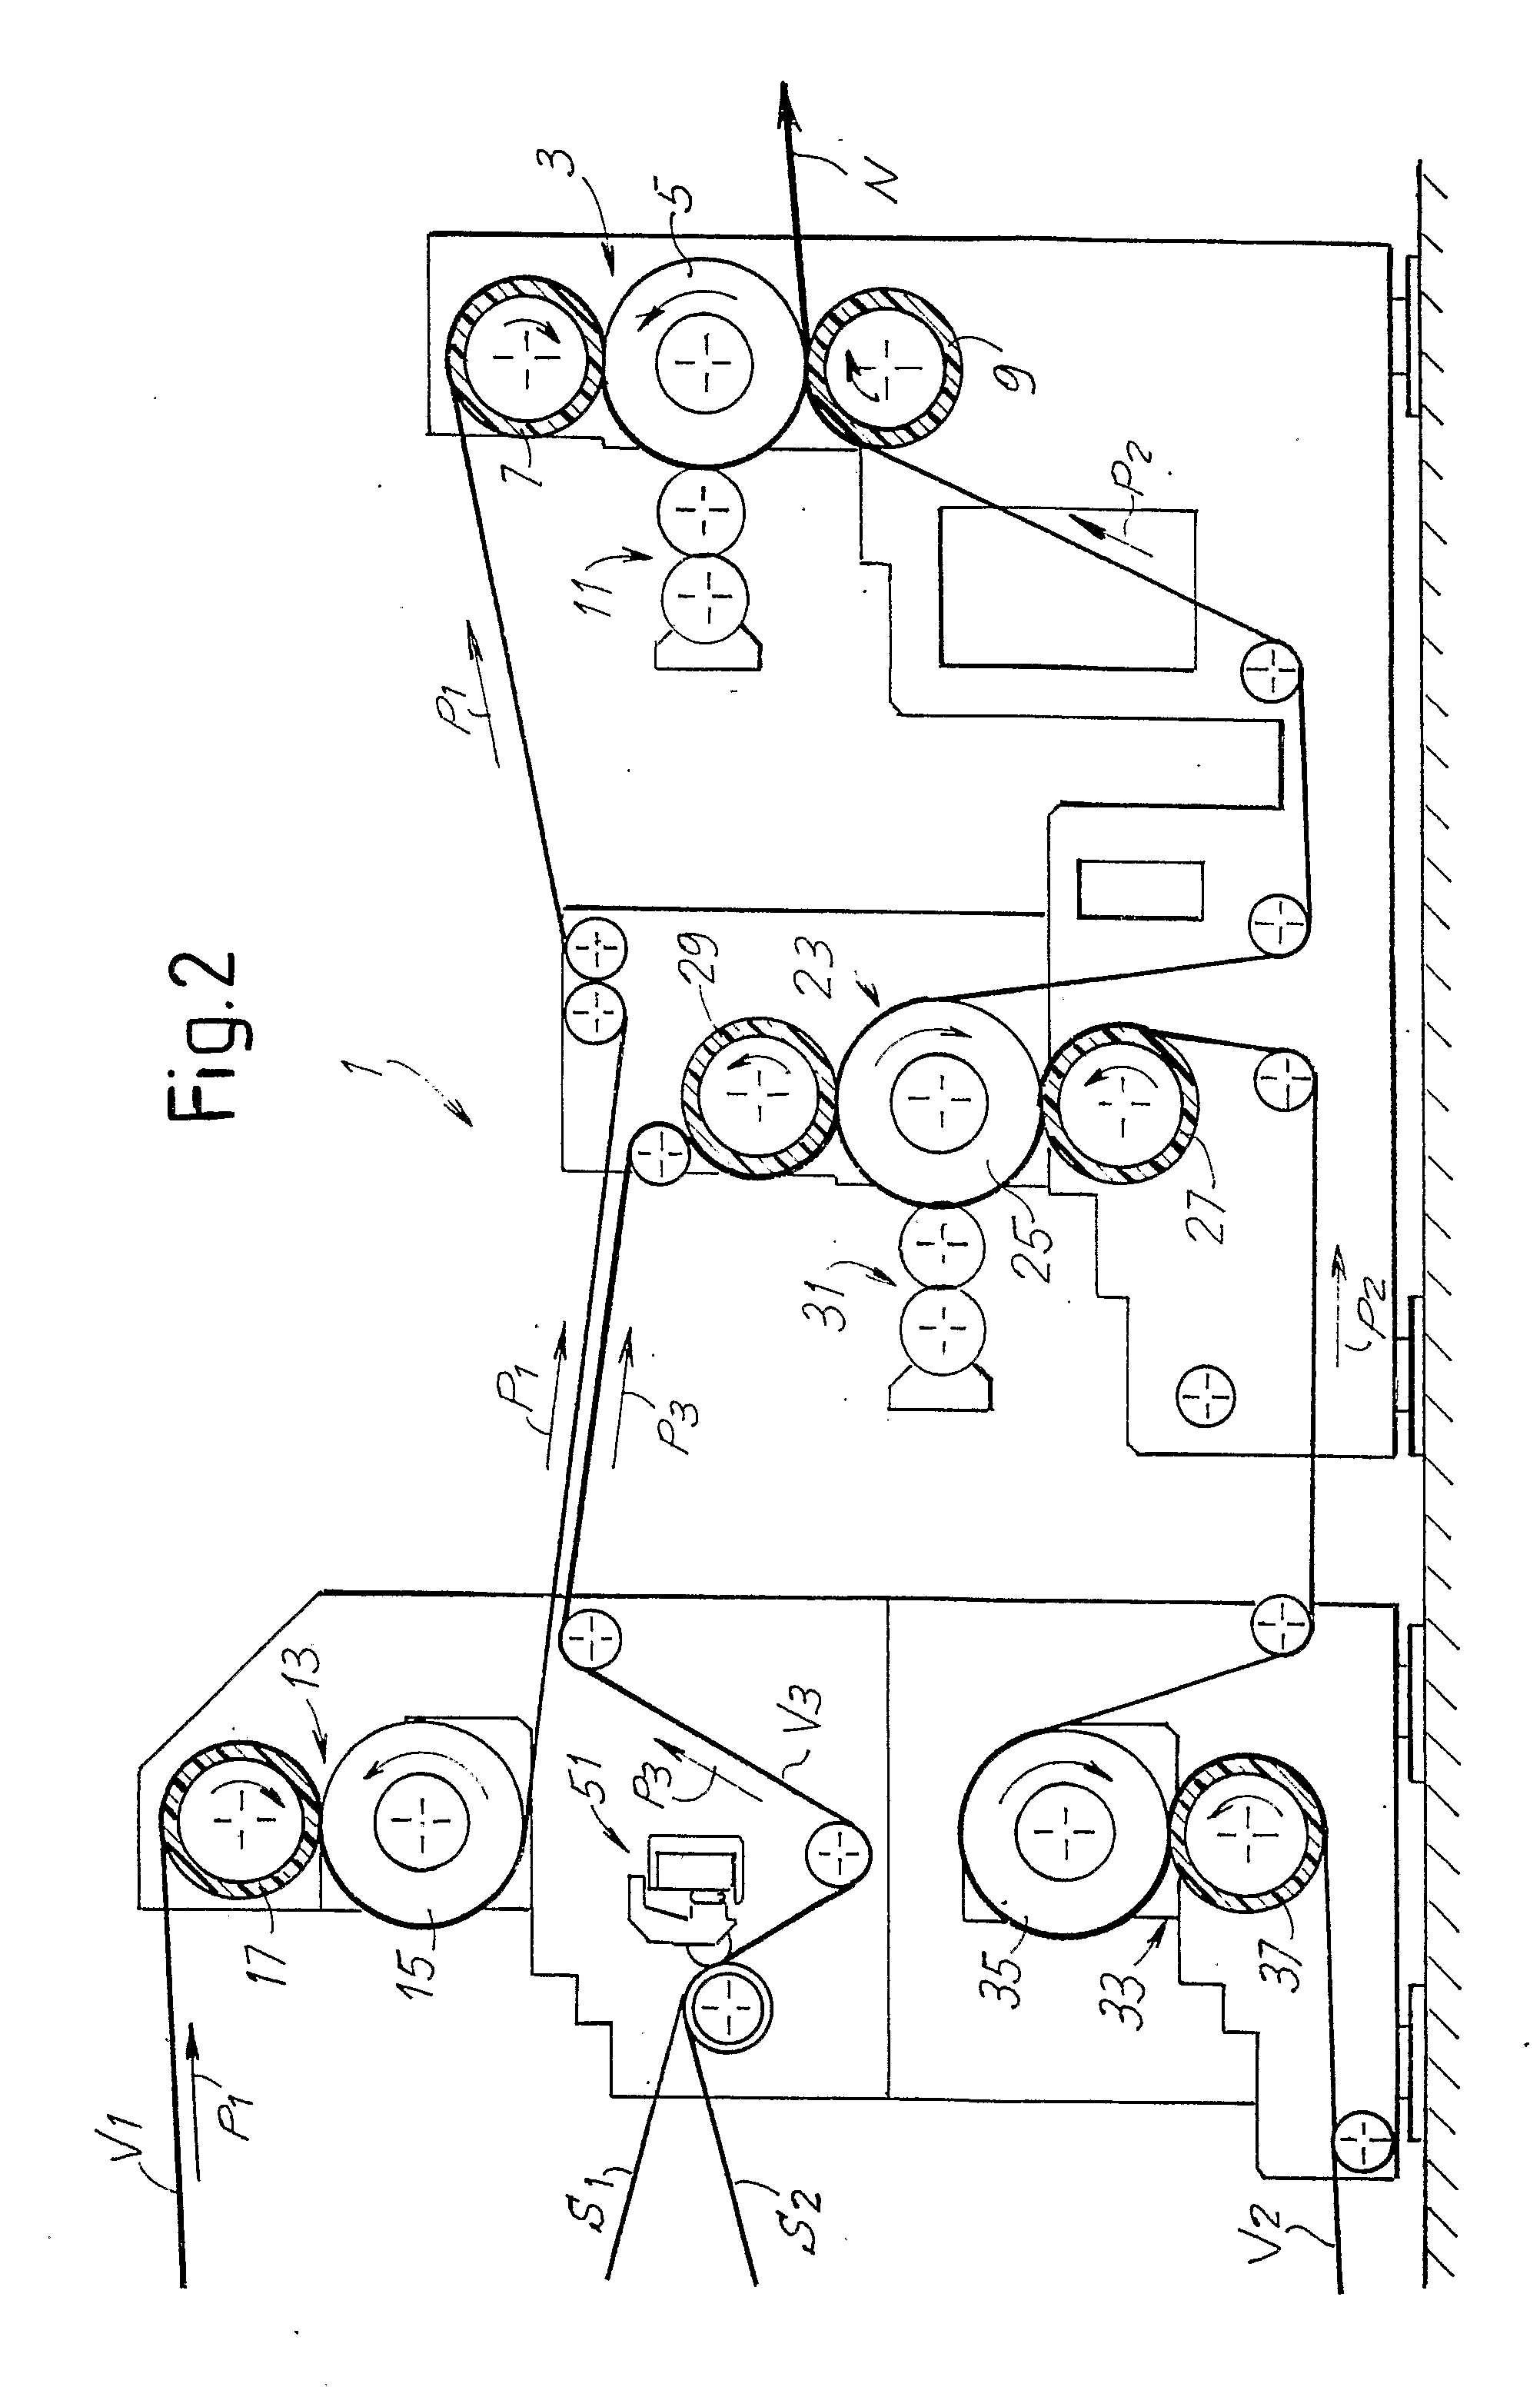 Multi-ply paper product or the like, method for the production thereof and relative system